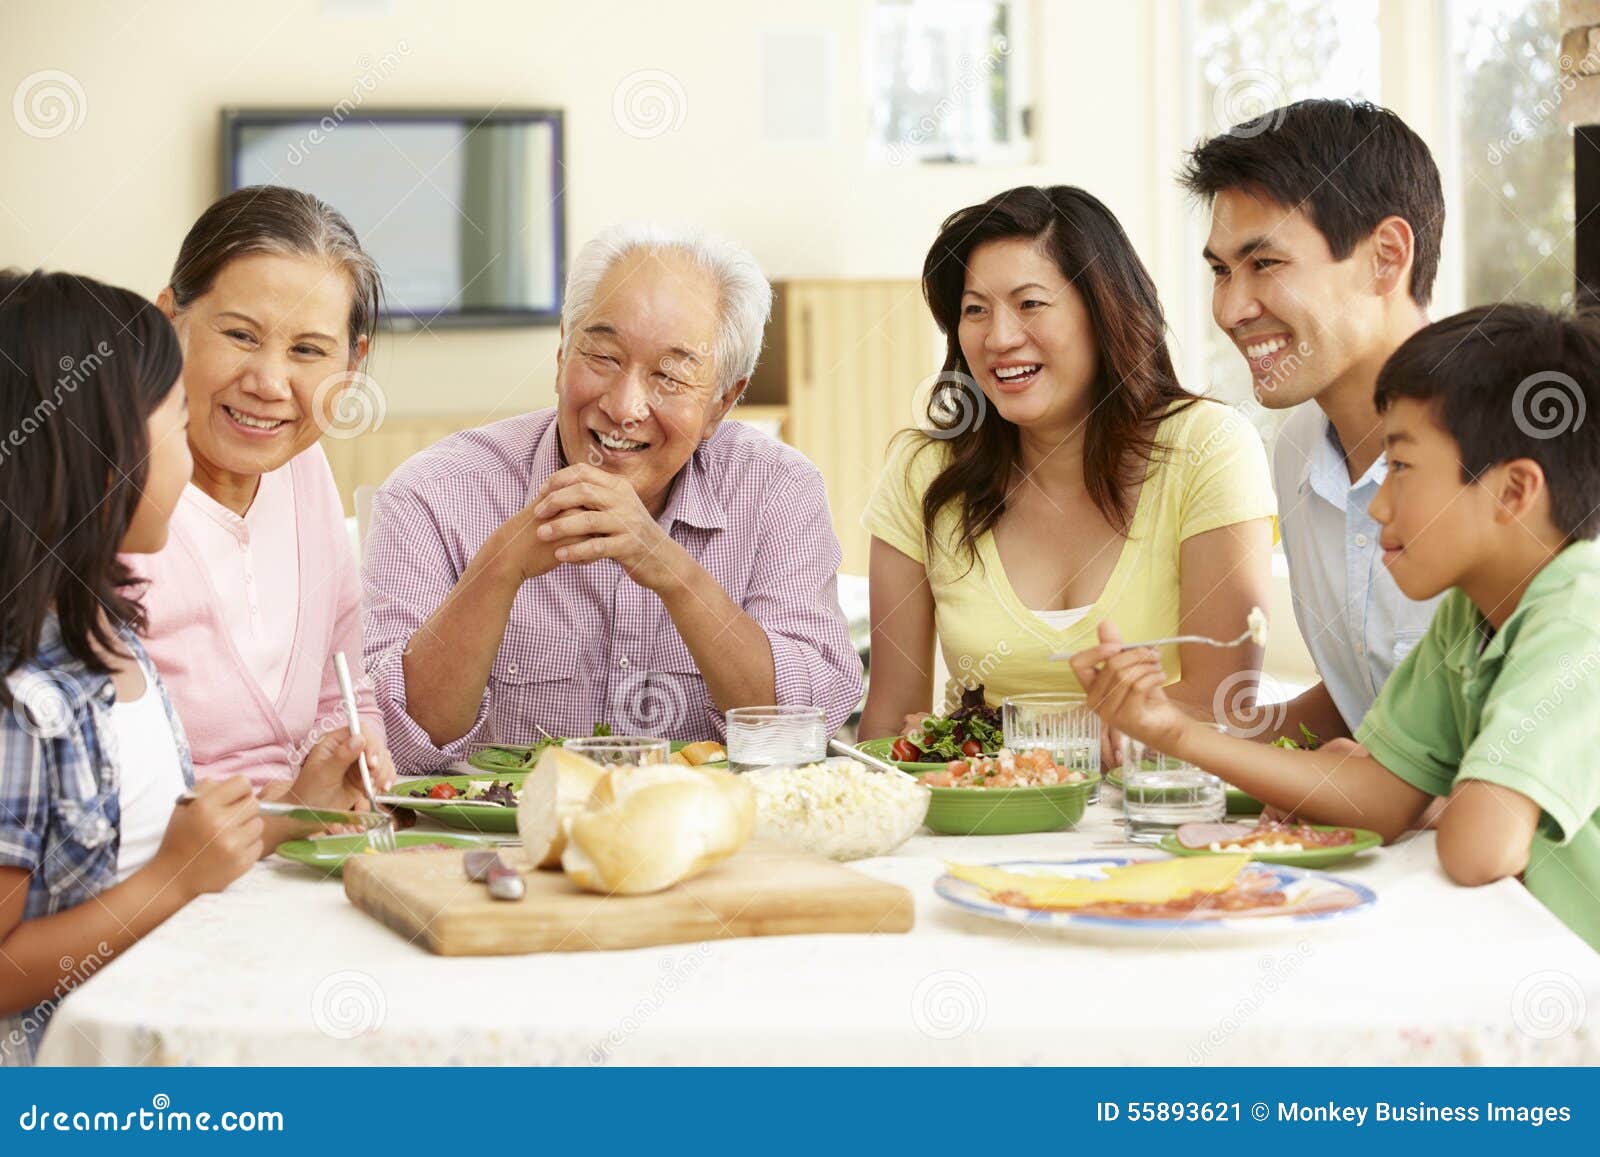 asian family sharing meal at home